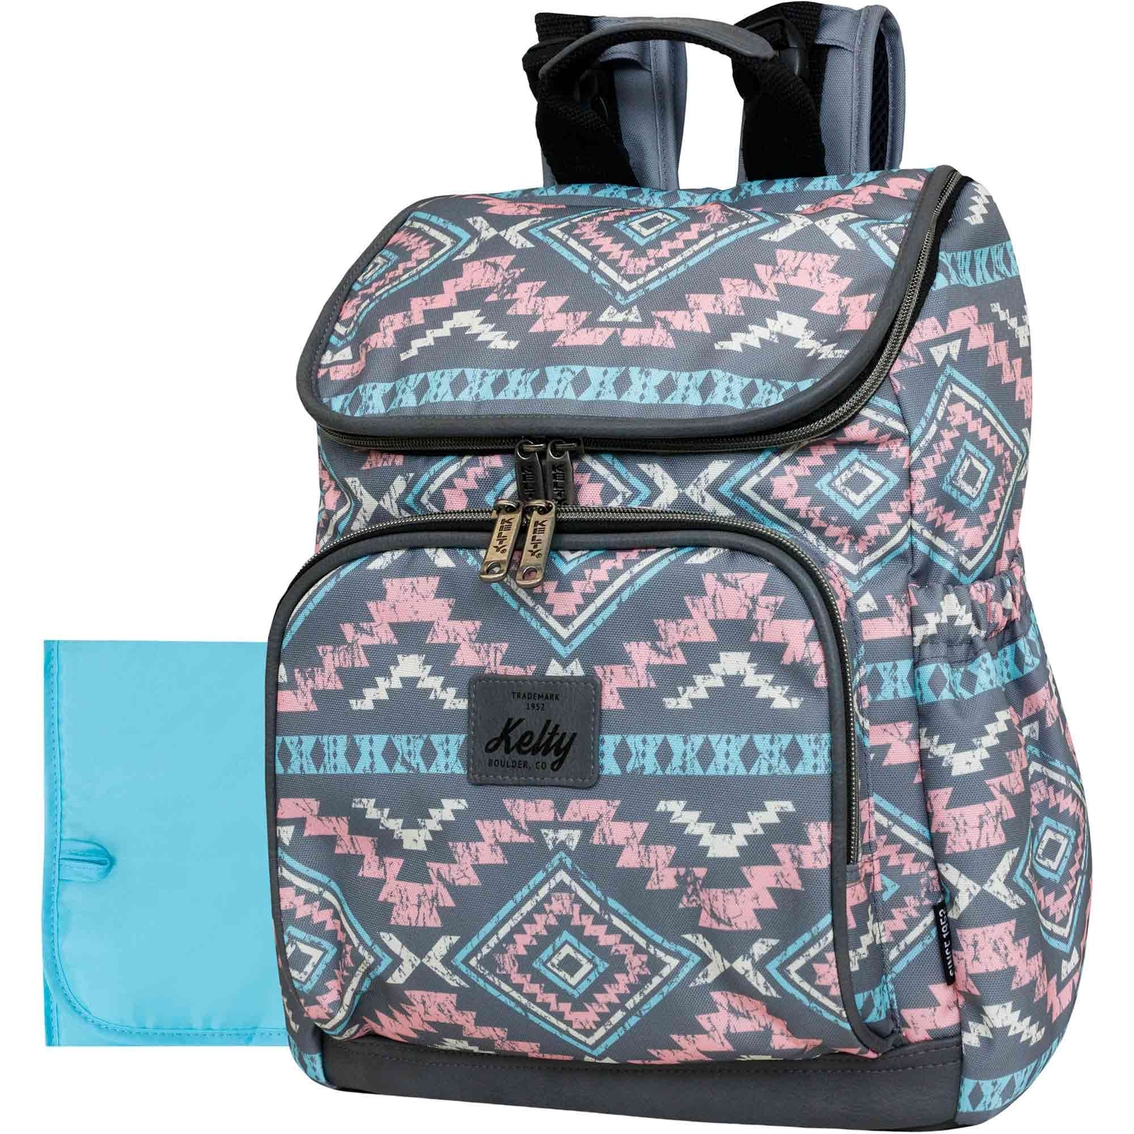 Kelty Backpack Diaper Bag | Diaper Bags & Accessories | Baby & Toys | Shop The Exchange